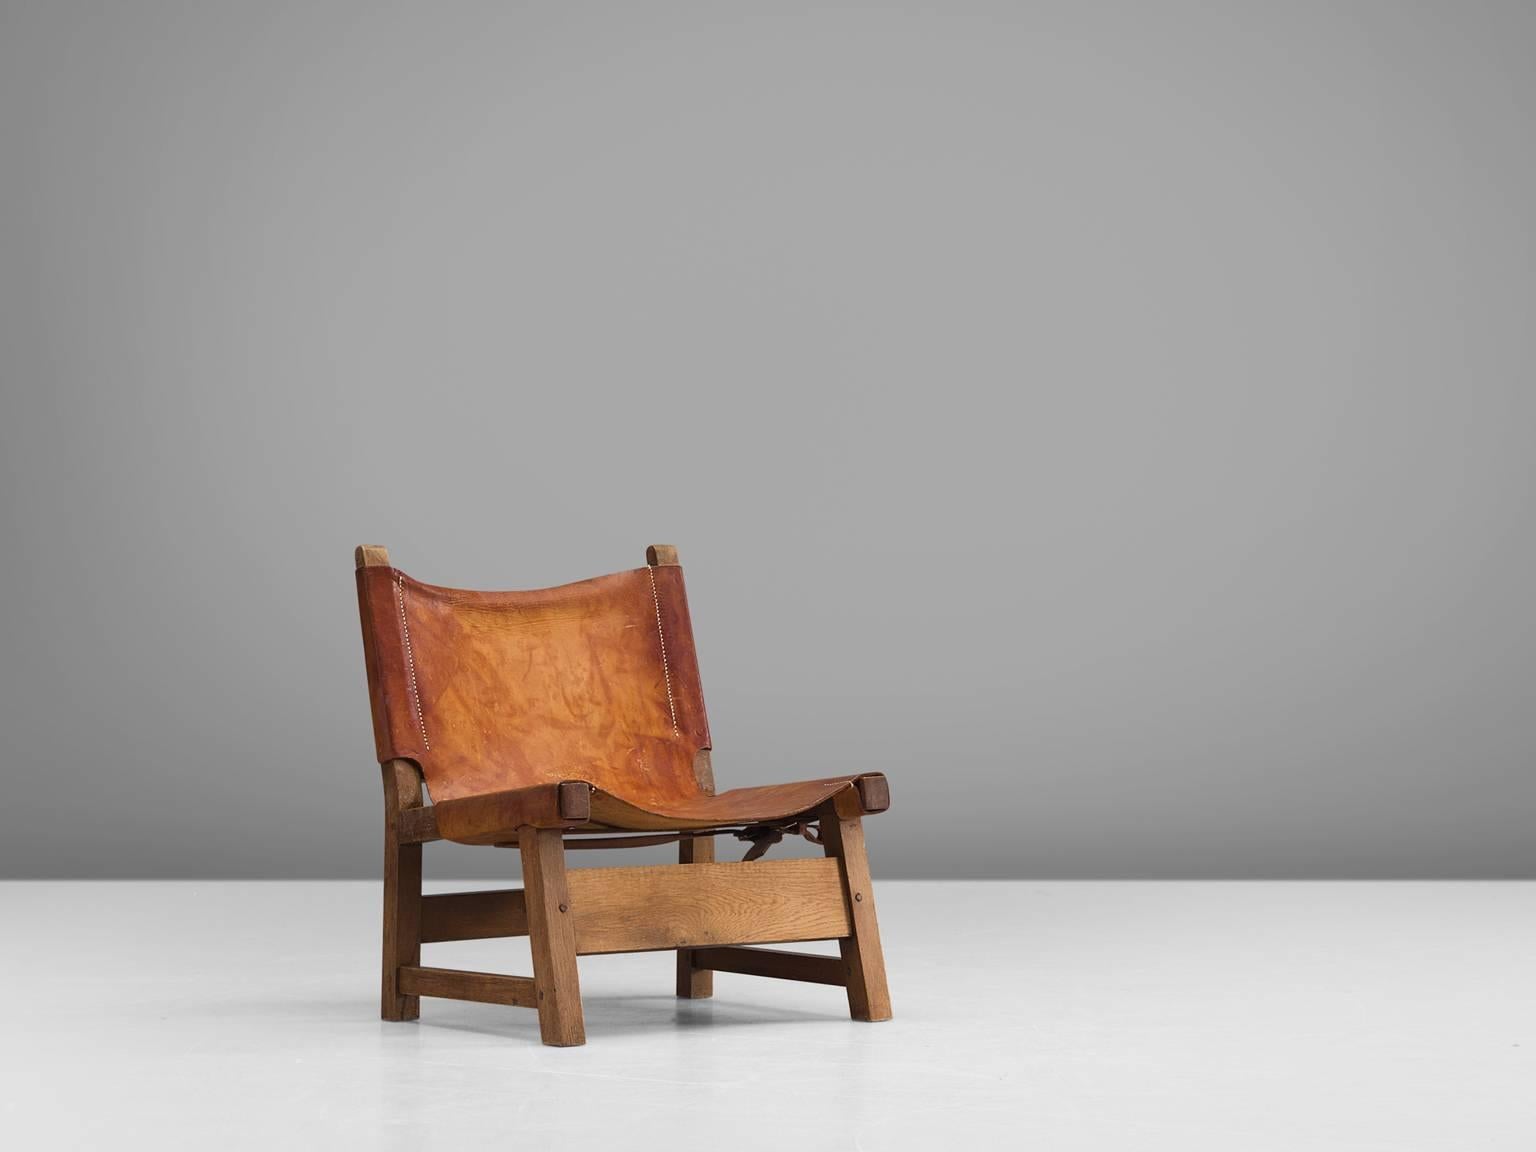 Hunting chair, oak and cognac leather, 1950s, Denmark.

This strong and robust low lounge chair is unmistakably Danish. The design of this hunting chair, with it leather loosely attached to the frame by means of straps that go around the frame and